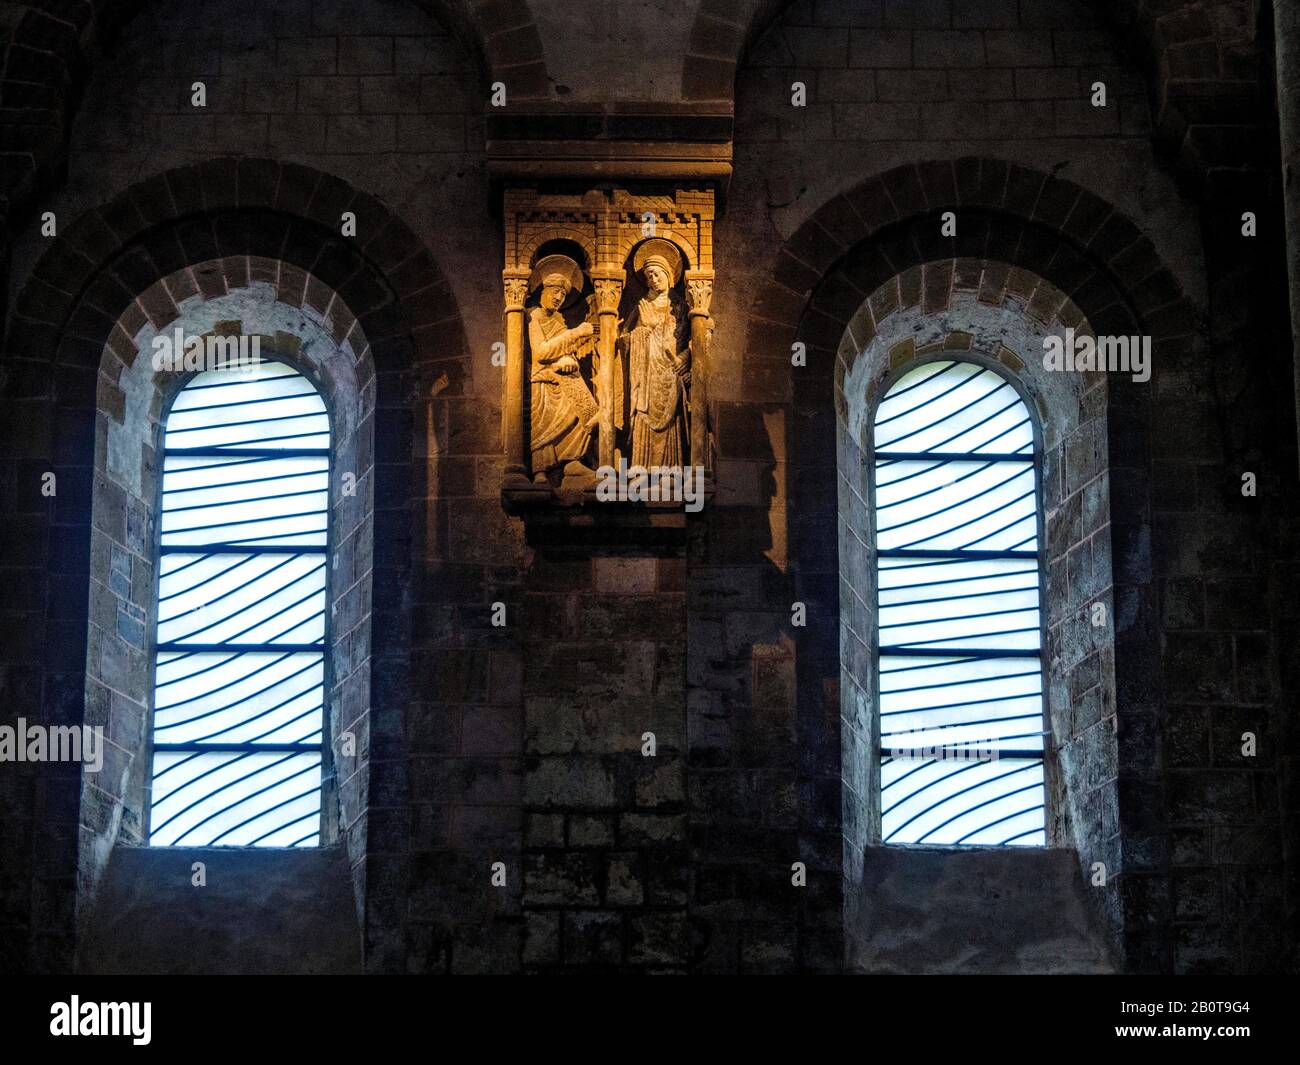 Stained glass window by Pierre Soulages, Sainte Foy abbey church in the ancient village of Conques on Saint James Way,Aveyron, Occitanie, France Stock Photo